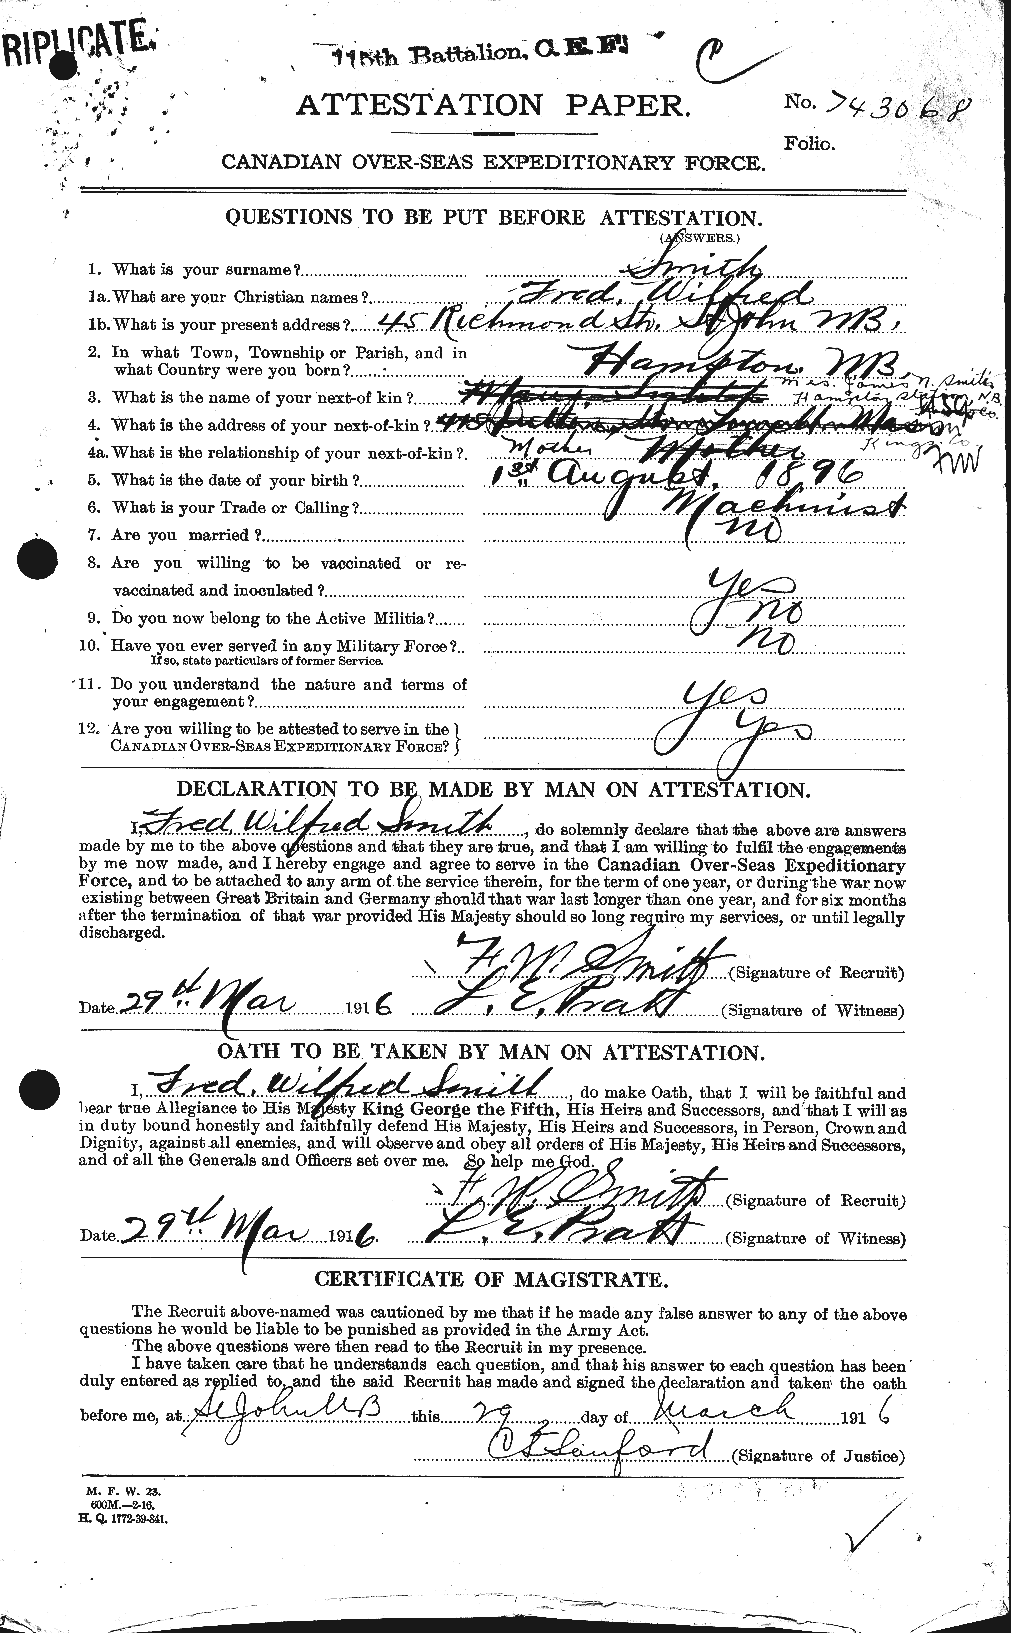 Personnel Records of the First World War - CEF 105798a